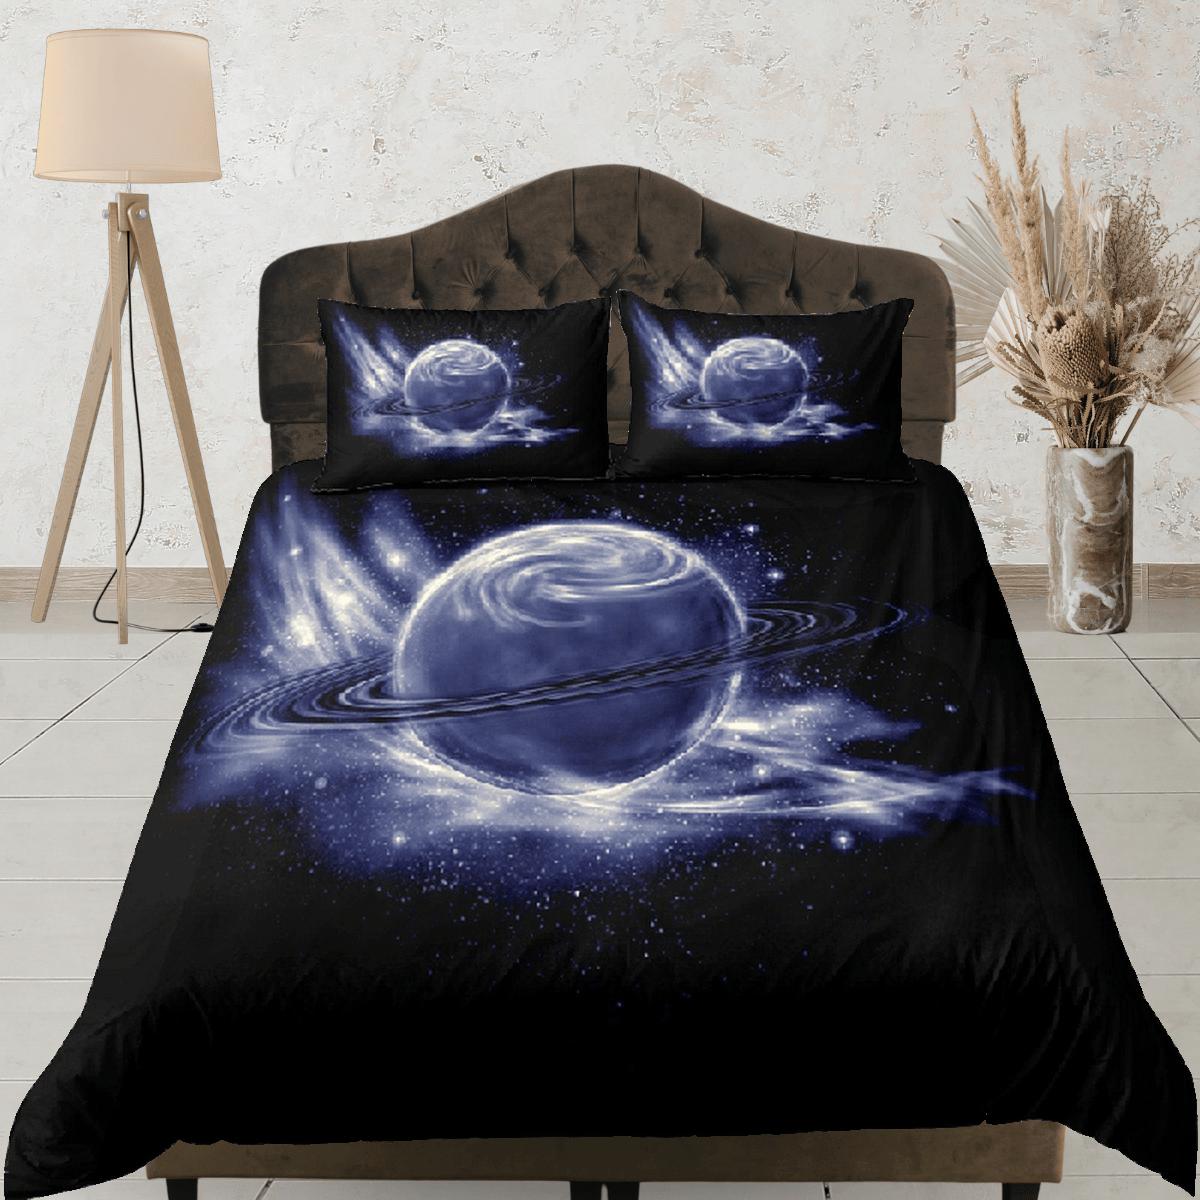 daintyduvet Grey planet duvet cover set, Saturn galaxy bedding, outer space bedding set full, duvet cover king, queen, dorm bedding, toddler bedding